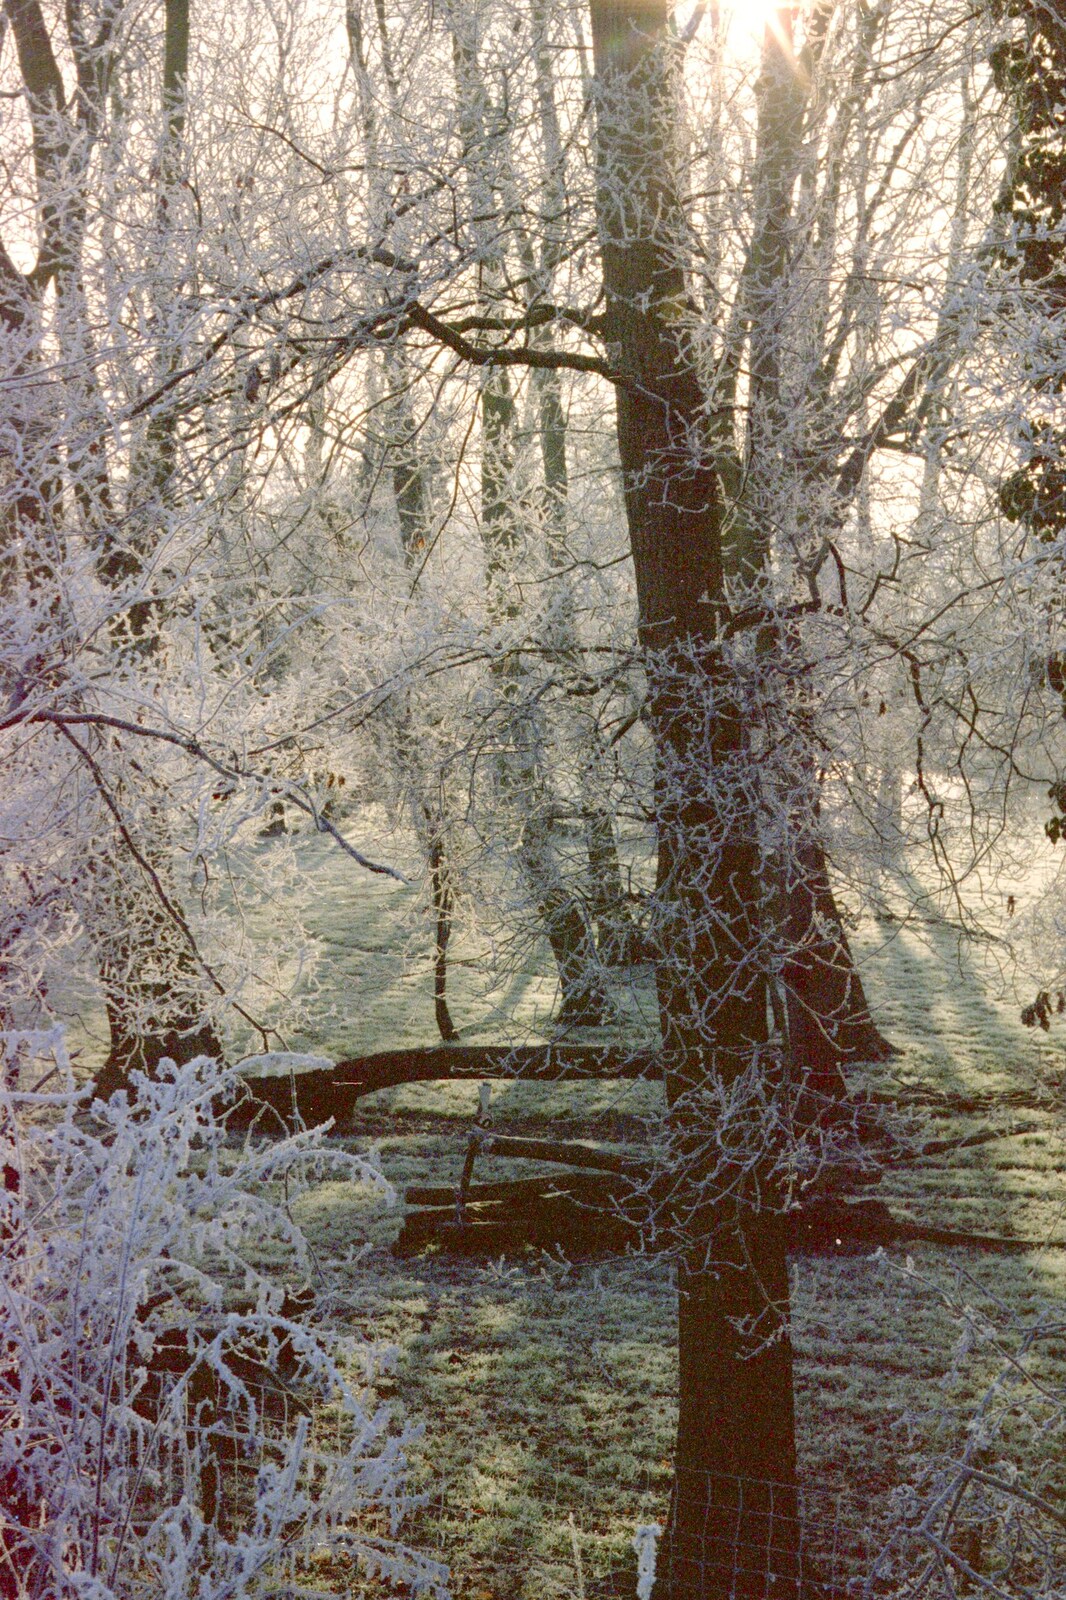 Low sun through some frosty trees somewhere from A Frosty Morning, Suffolk and Norfolk - 15th December 1991